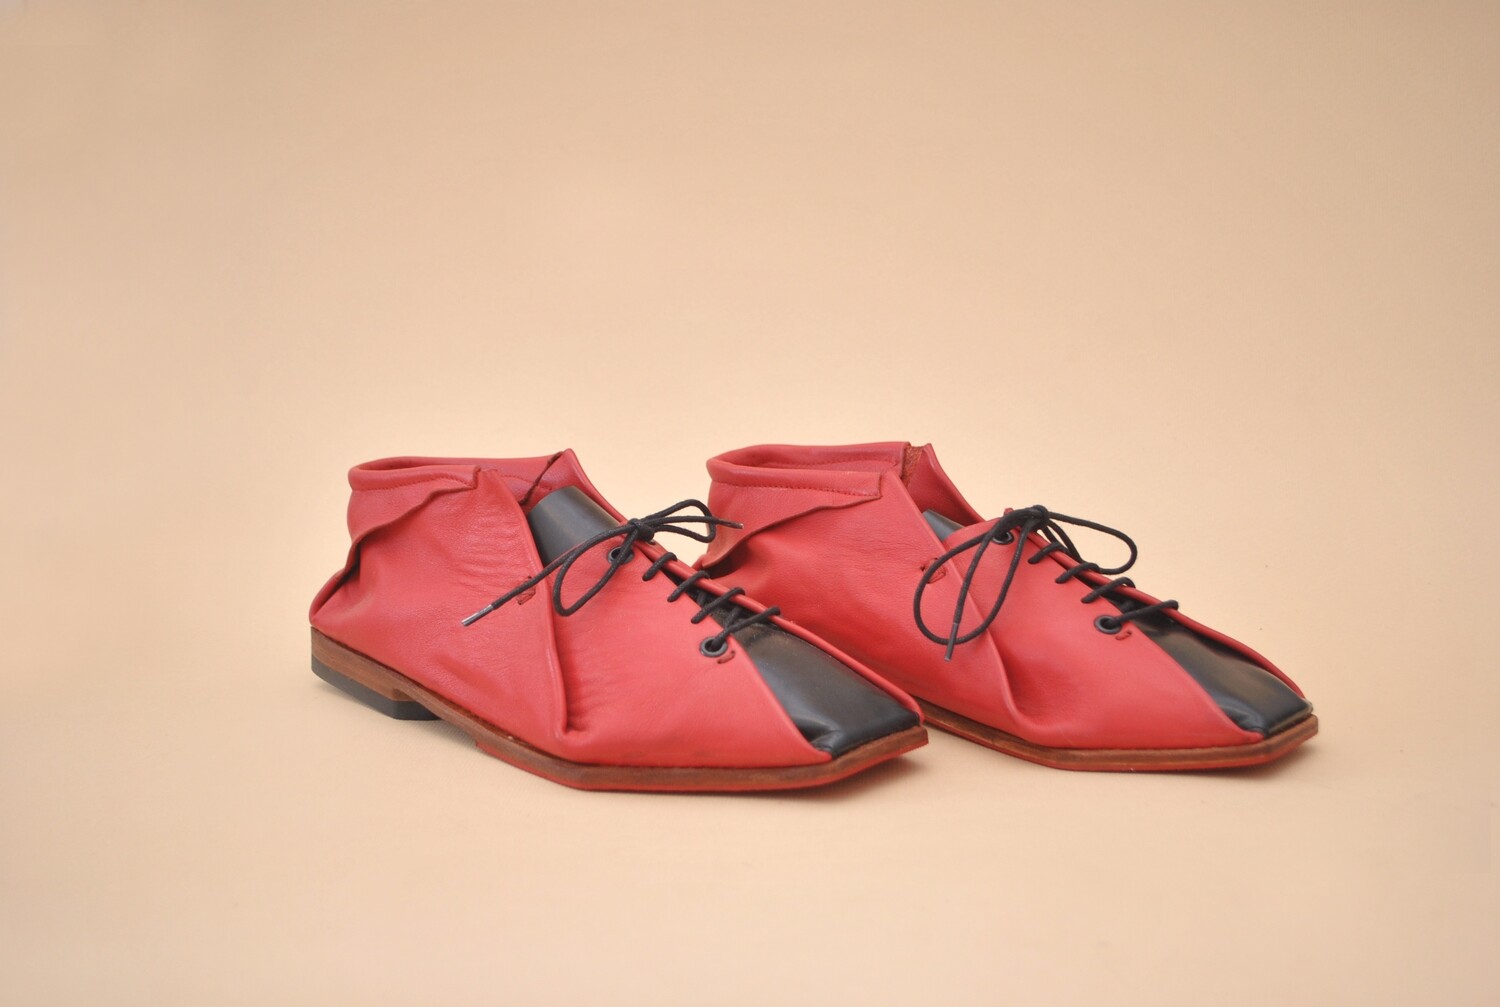 Mantta Shoes in red&black #39